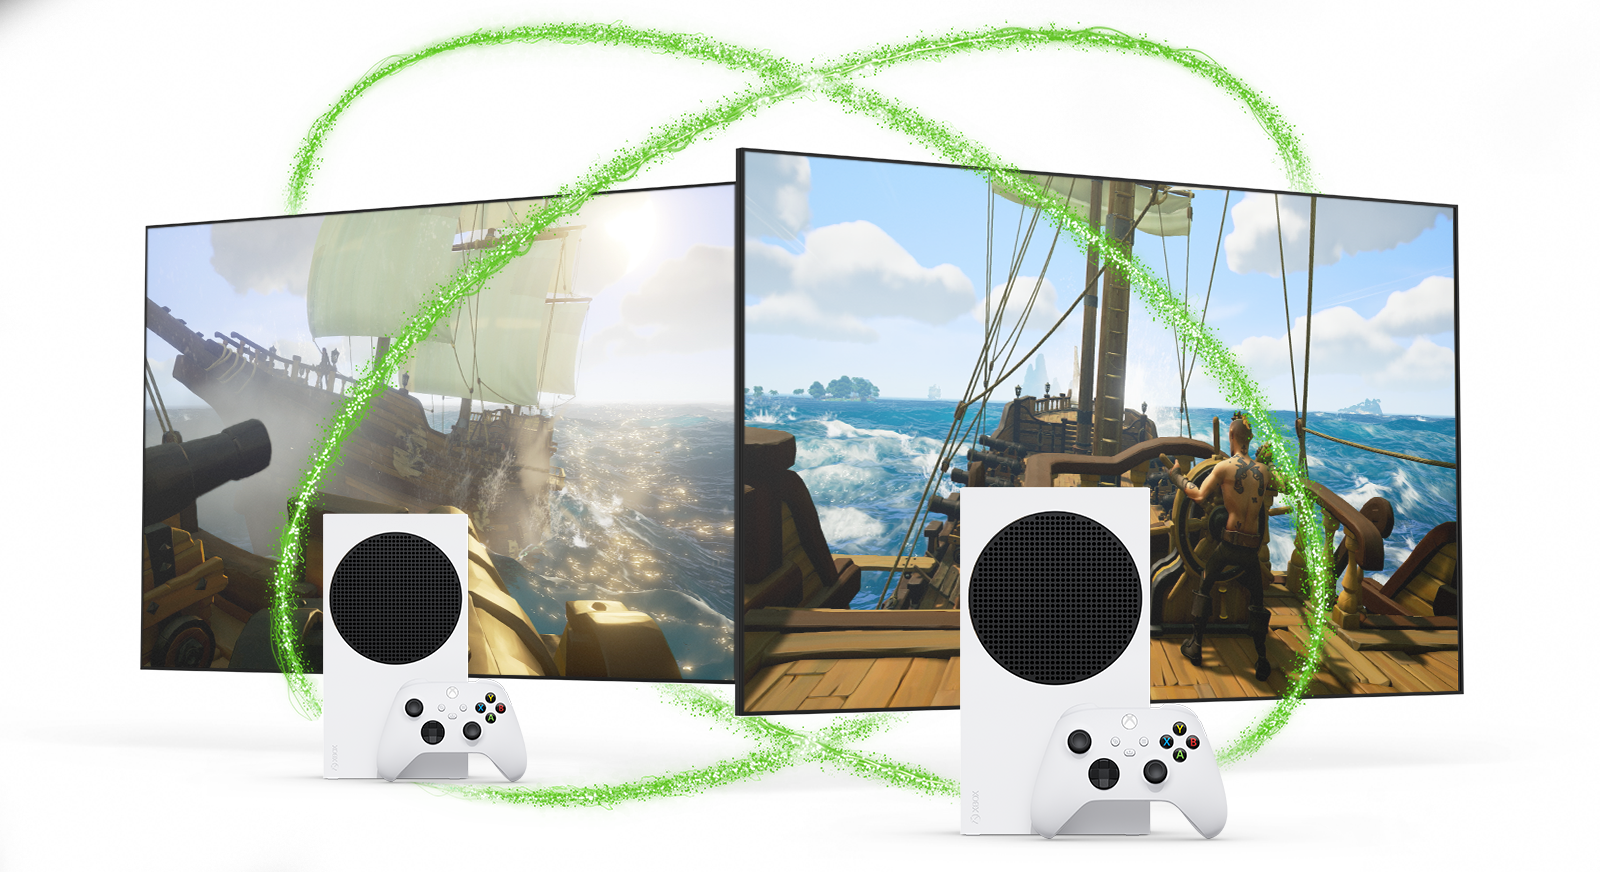 Xbox Series S consoles pictured with two screens depicting Sea of Thieves gameplay